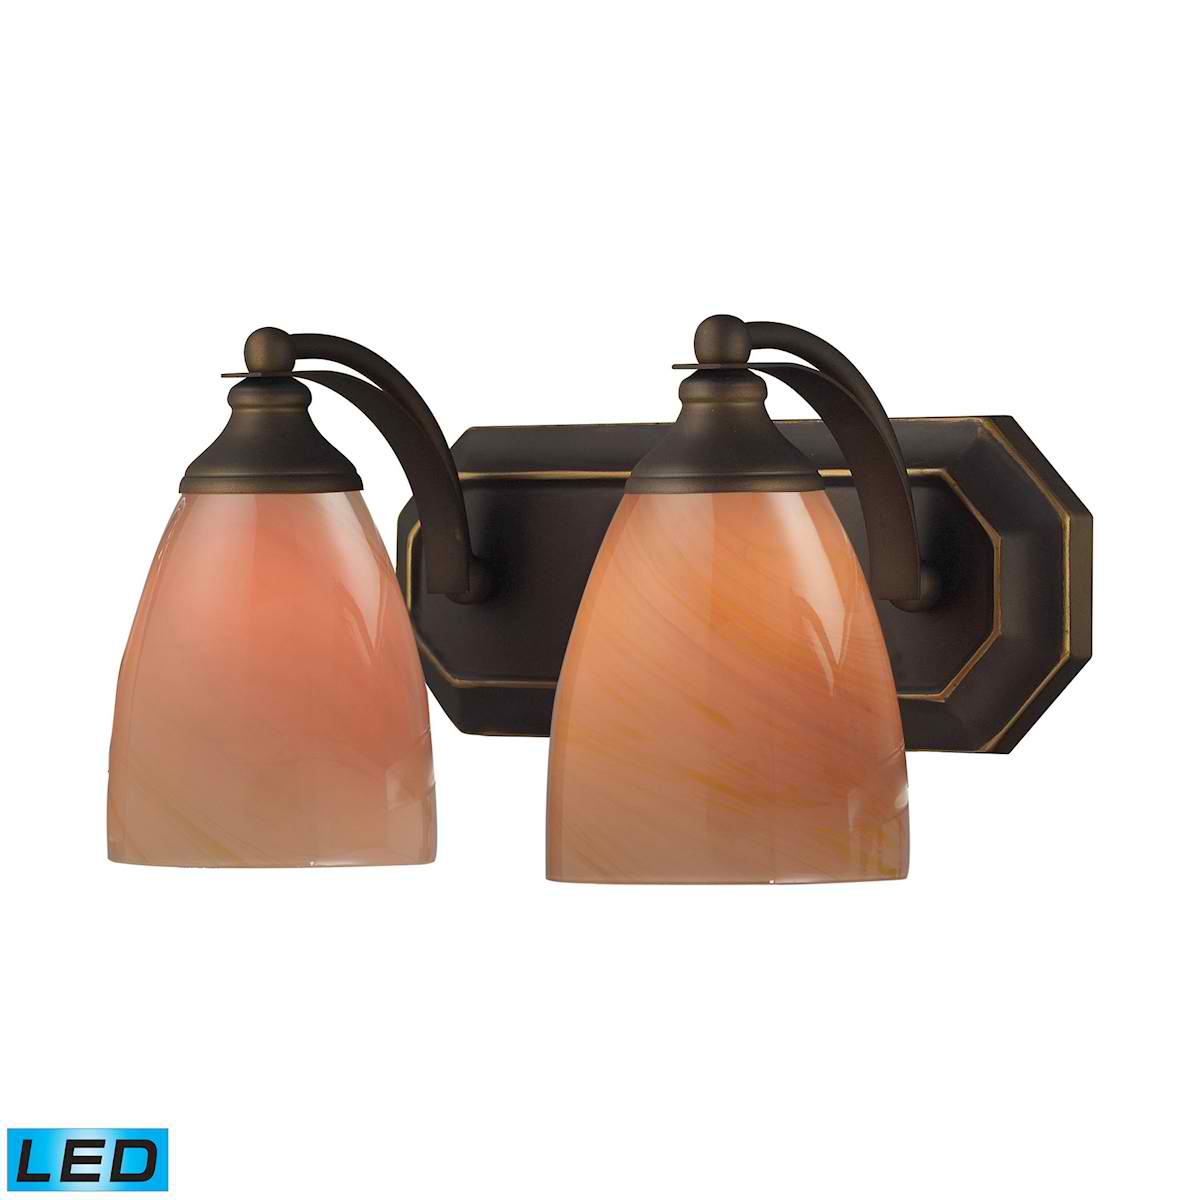 2 Light Vanity in Aged Bronze and Sandy Glass - LED, 800 Lumens (1600 Lumens Total) with Full Scale